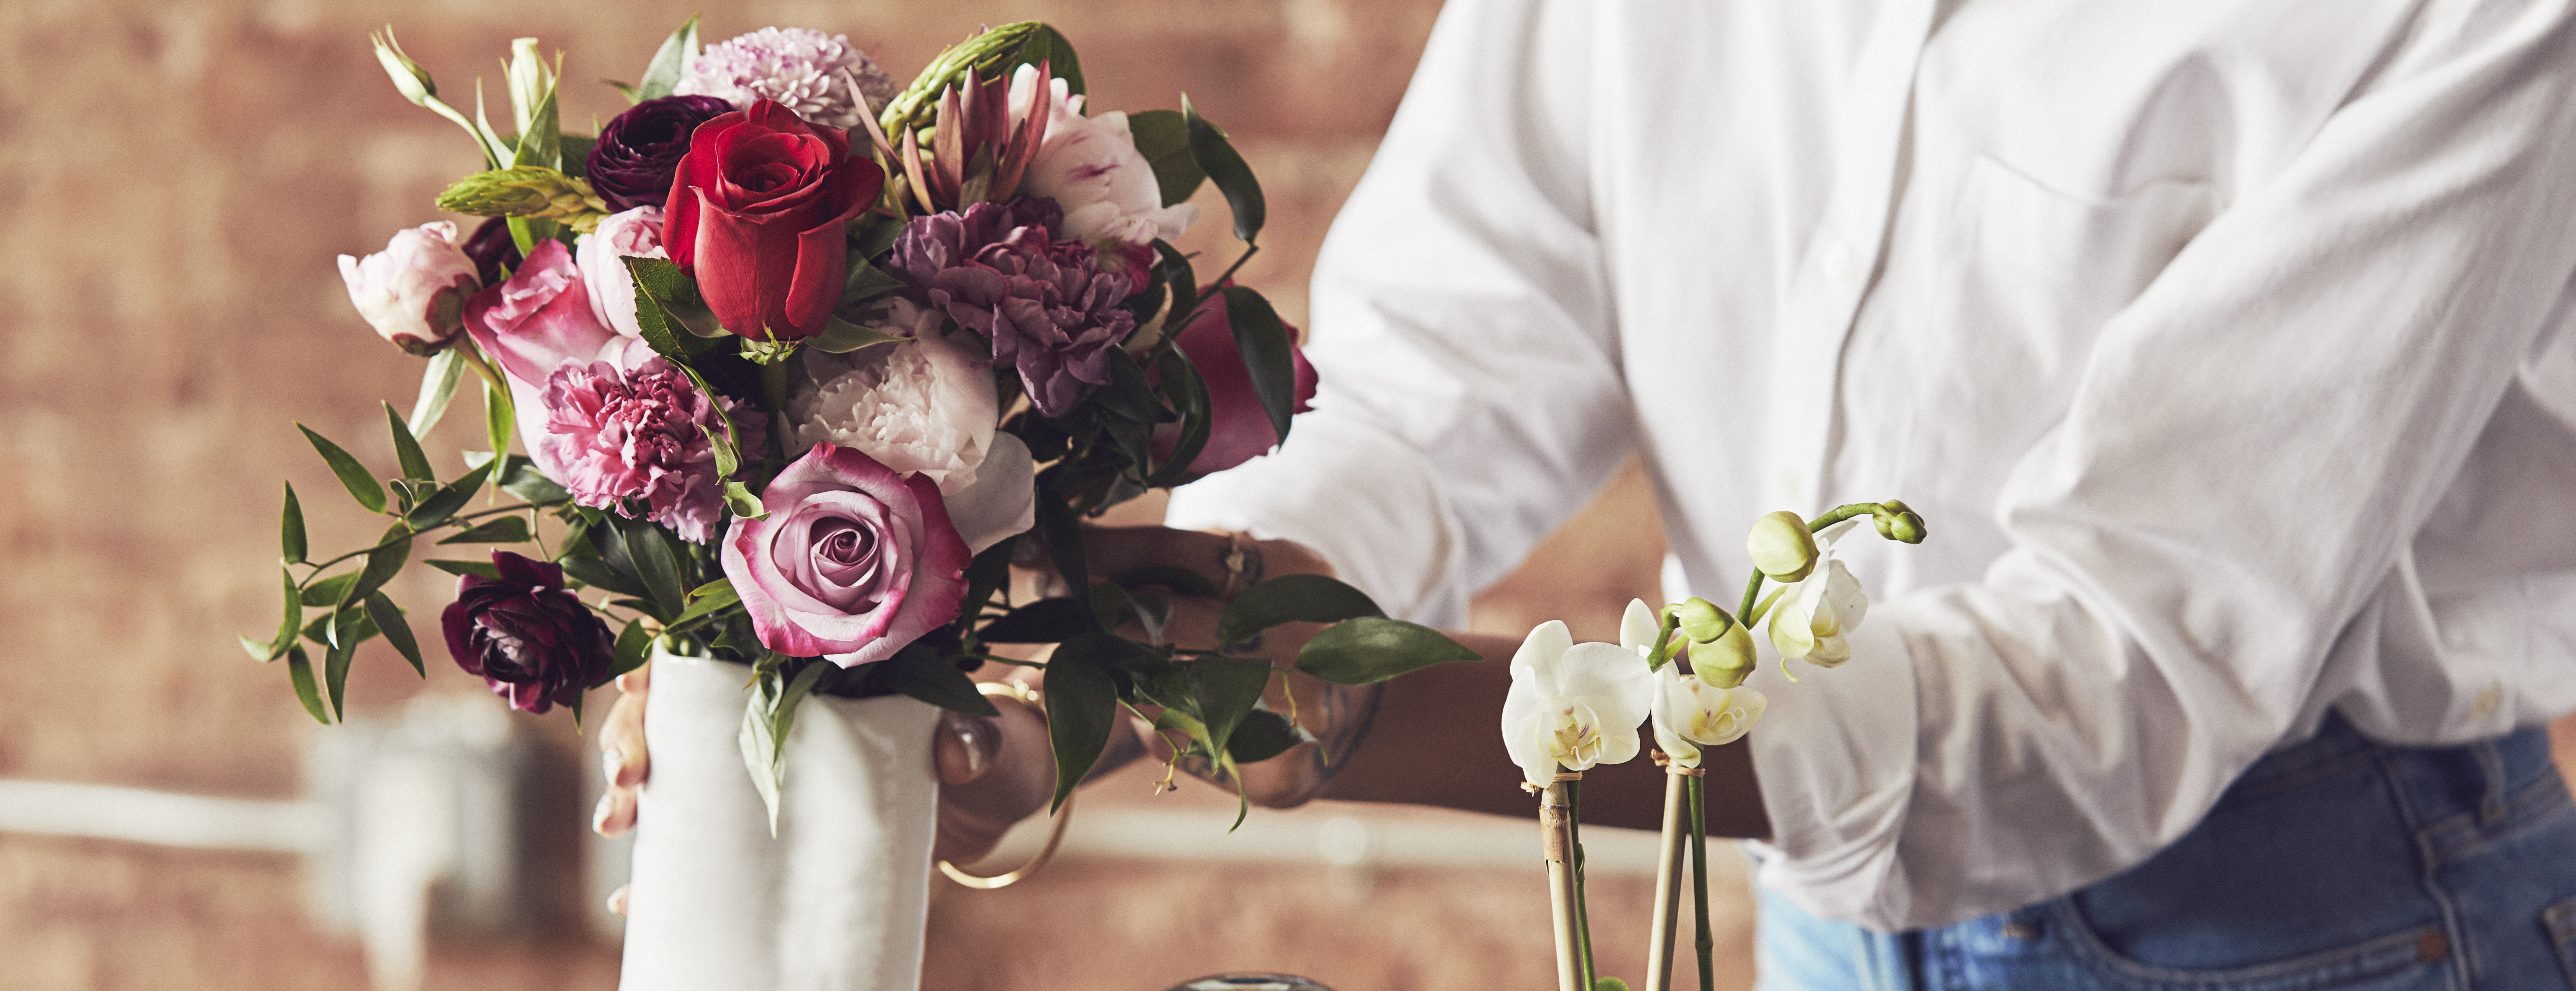 Get the most out of your bouquet.